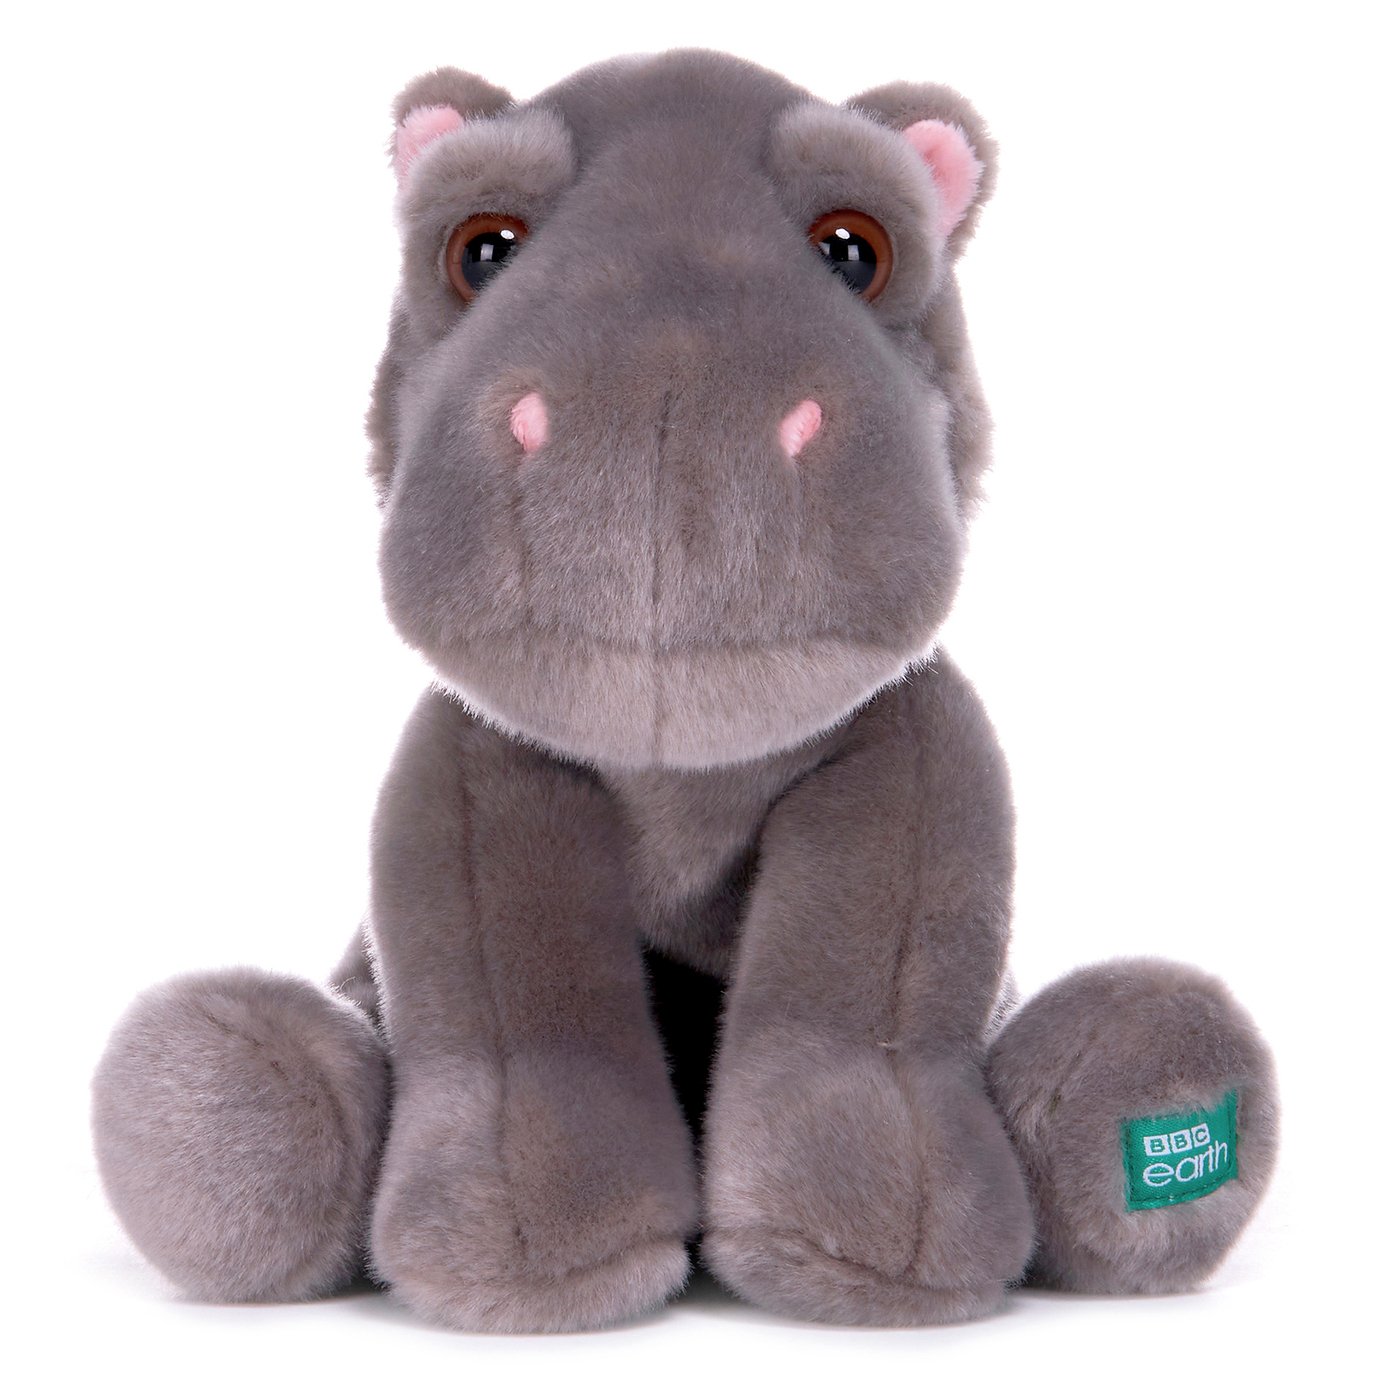 BBC Earth Babies 25cm Hippo Calf Soft Toy Review